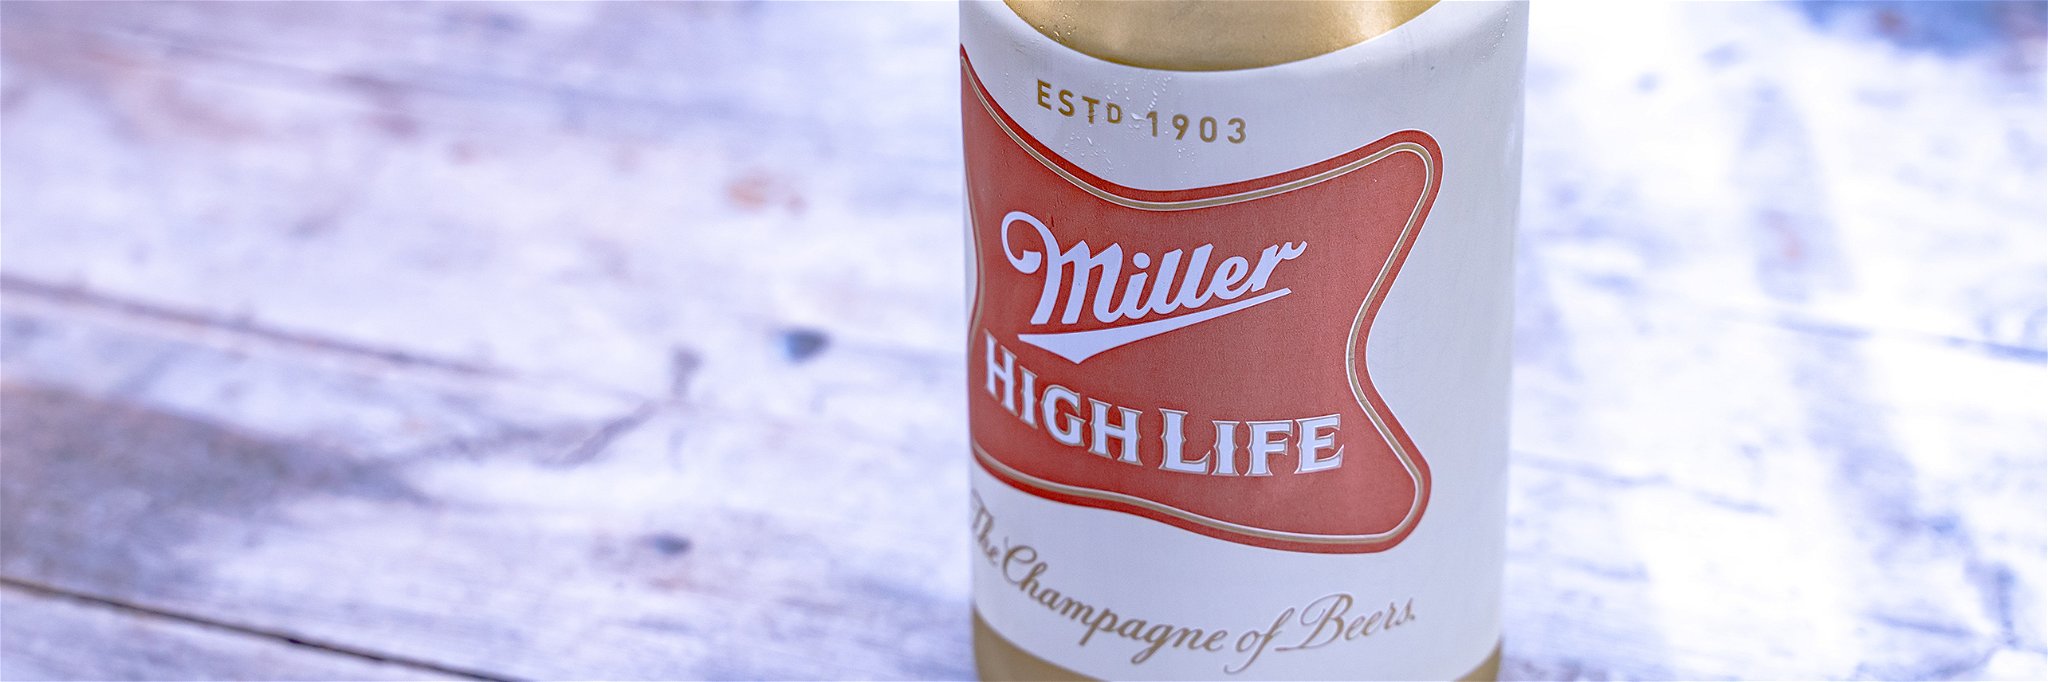 Can of Miller High Life Beer